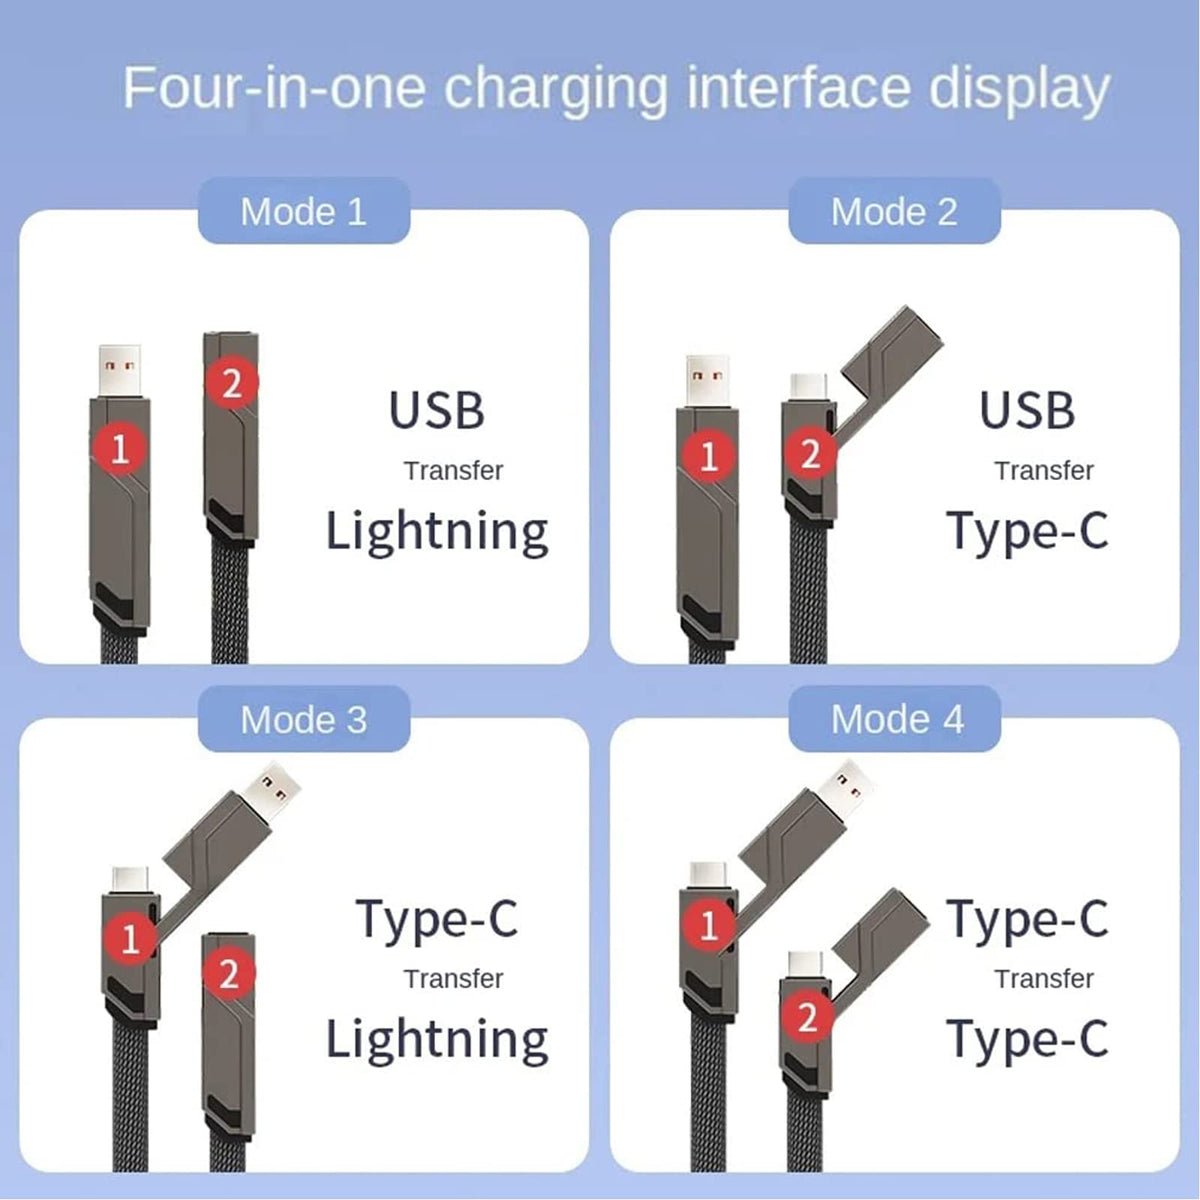 Verilux 4 in 1 Charging Cable USB A Type C to Type C Light-ning 100W Fast Charging Cable Nylon Braided for iOS/ Android Compatible with iPhone, iPad, Samsung Galaxy, Huawei, PC, HTC, OnePlus - 1.5M